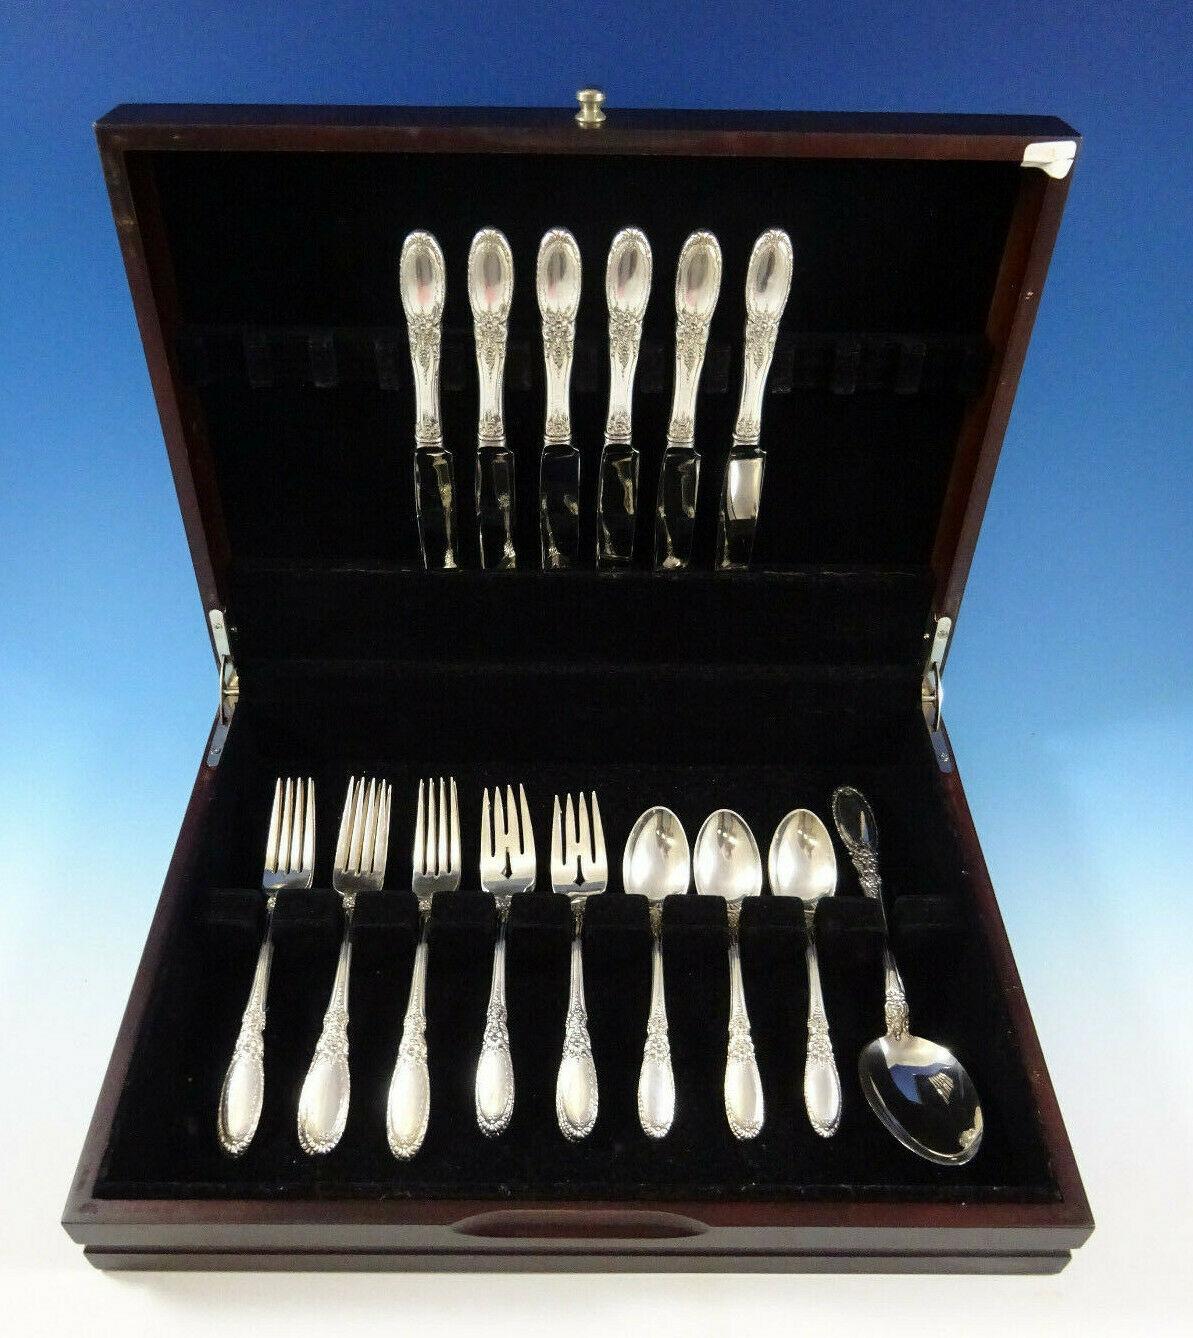 Beautiful old mirror by Towle sterling silver flatware set - 25 pieces. Great starter set! This set includes:

6 knives, 8 7/8